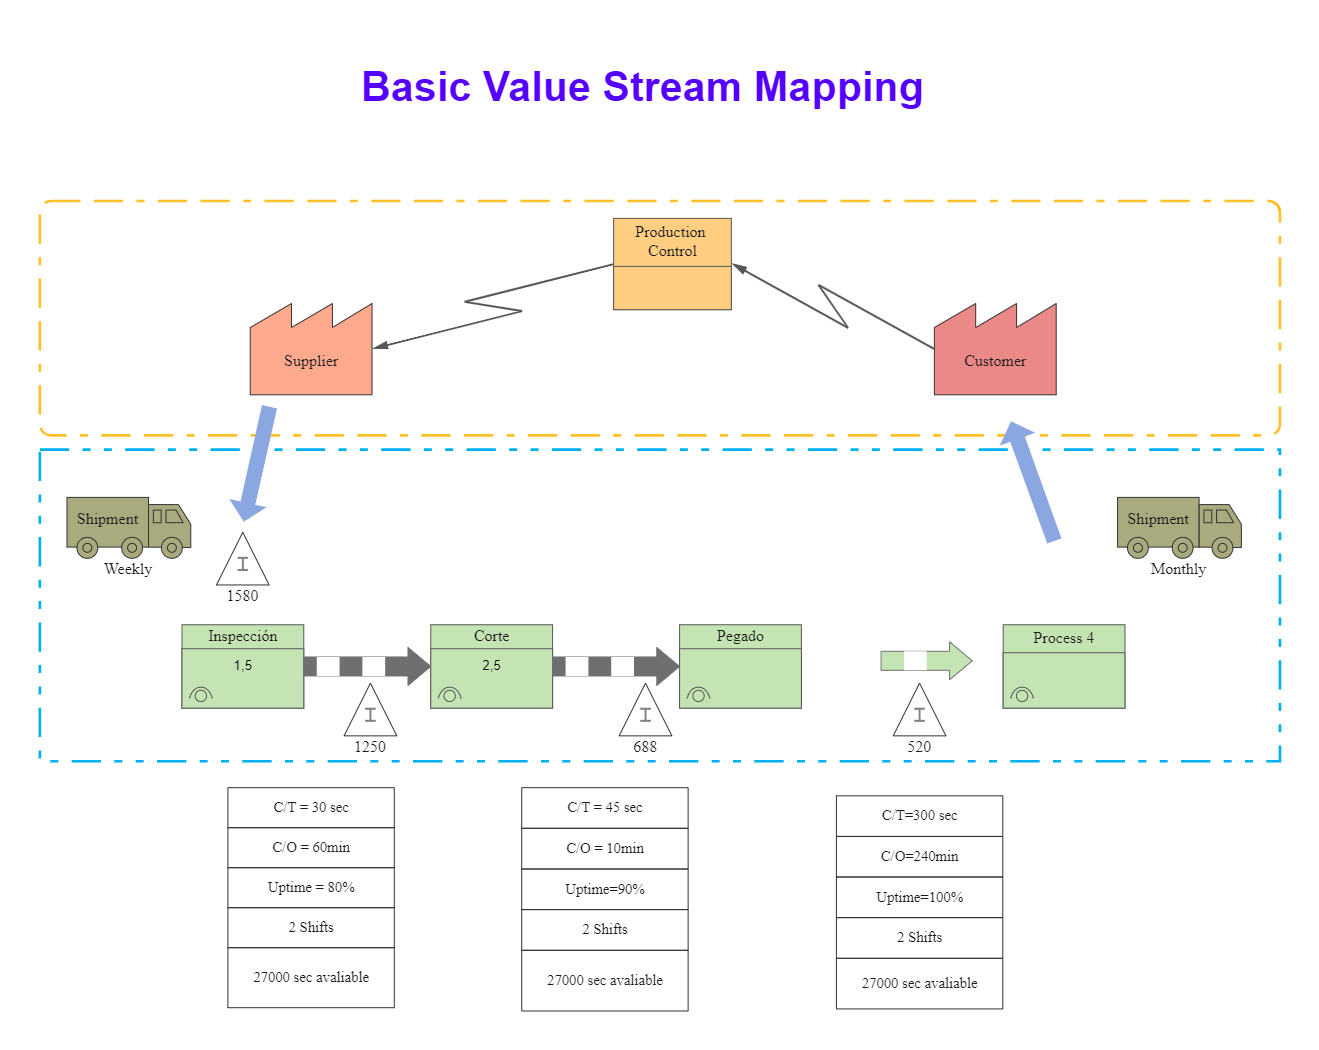 Basic Value Stream Mapping